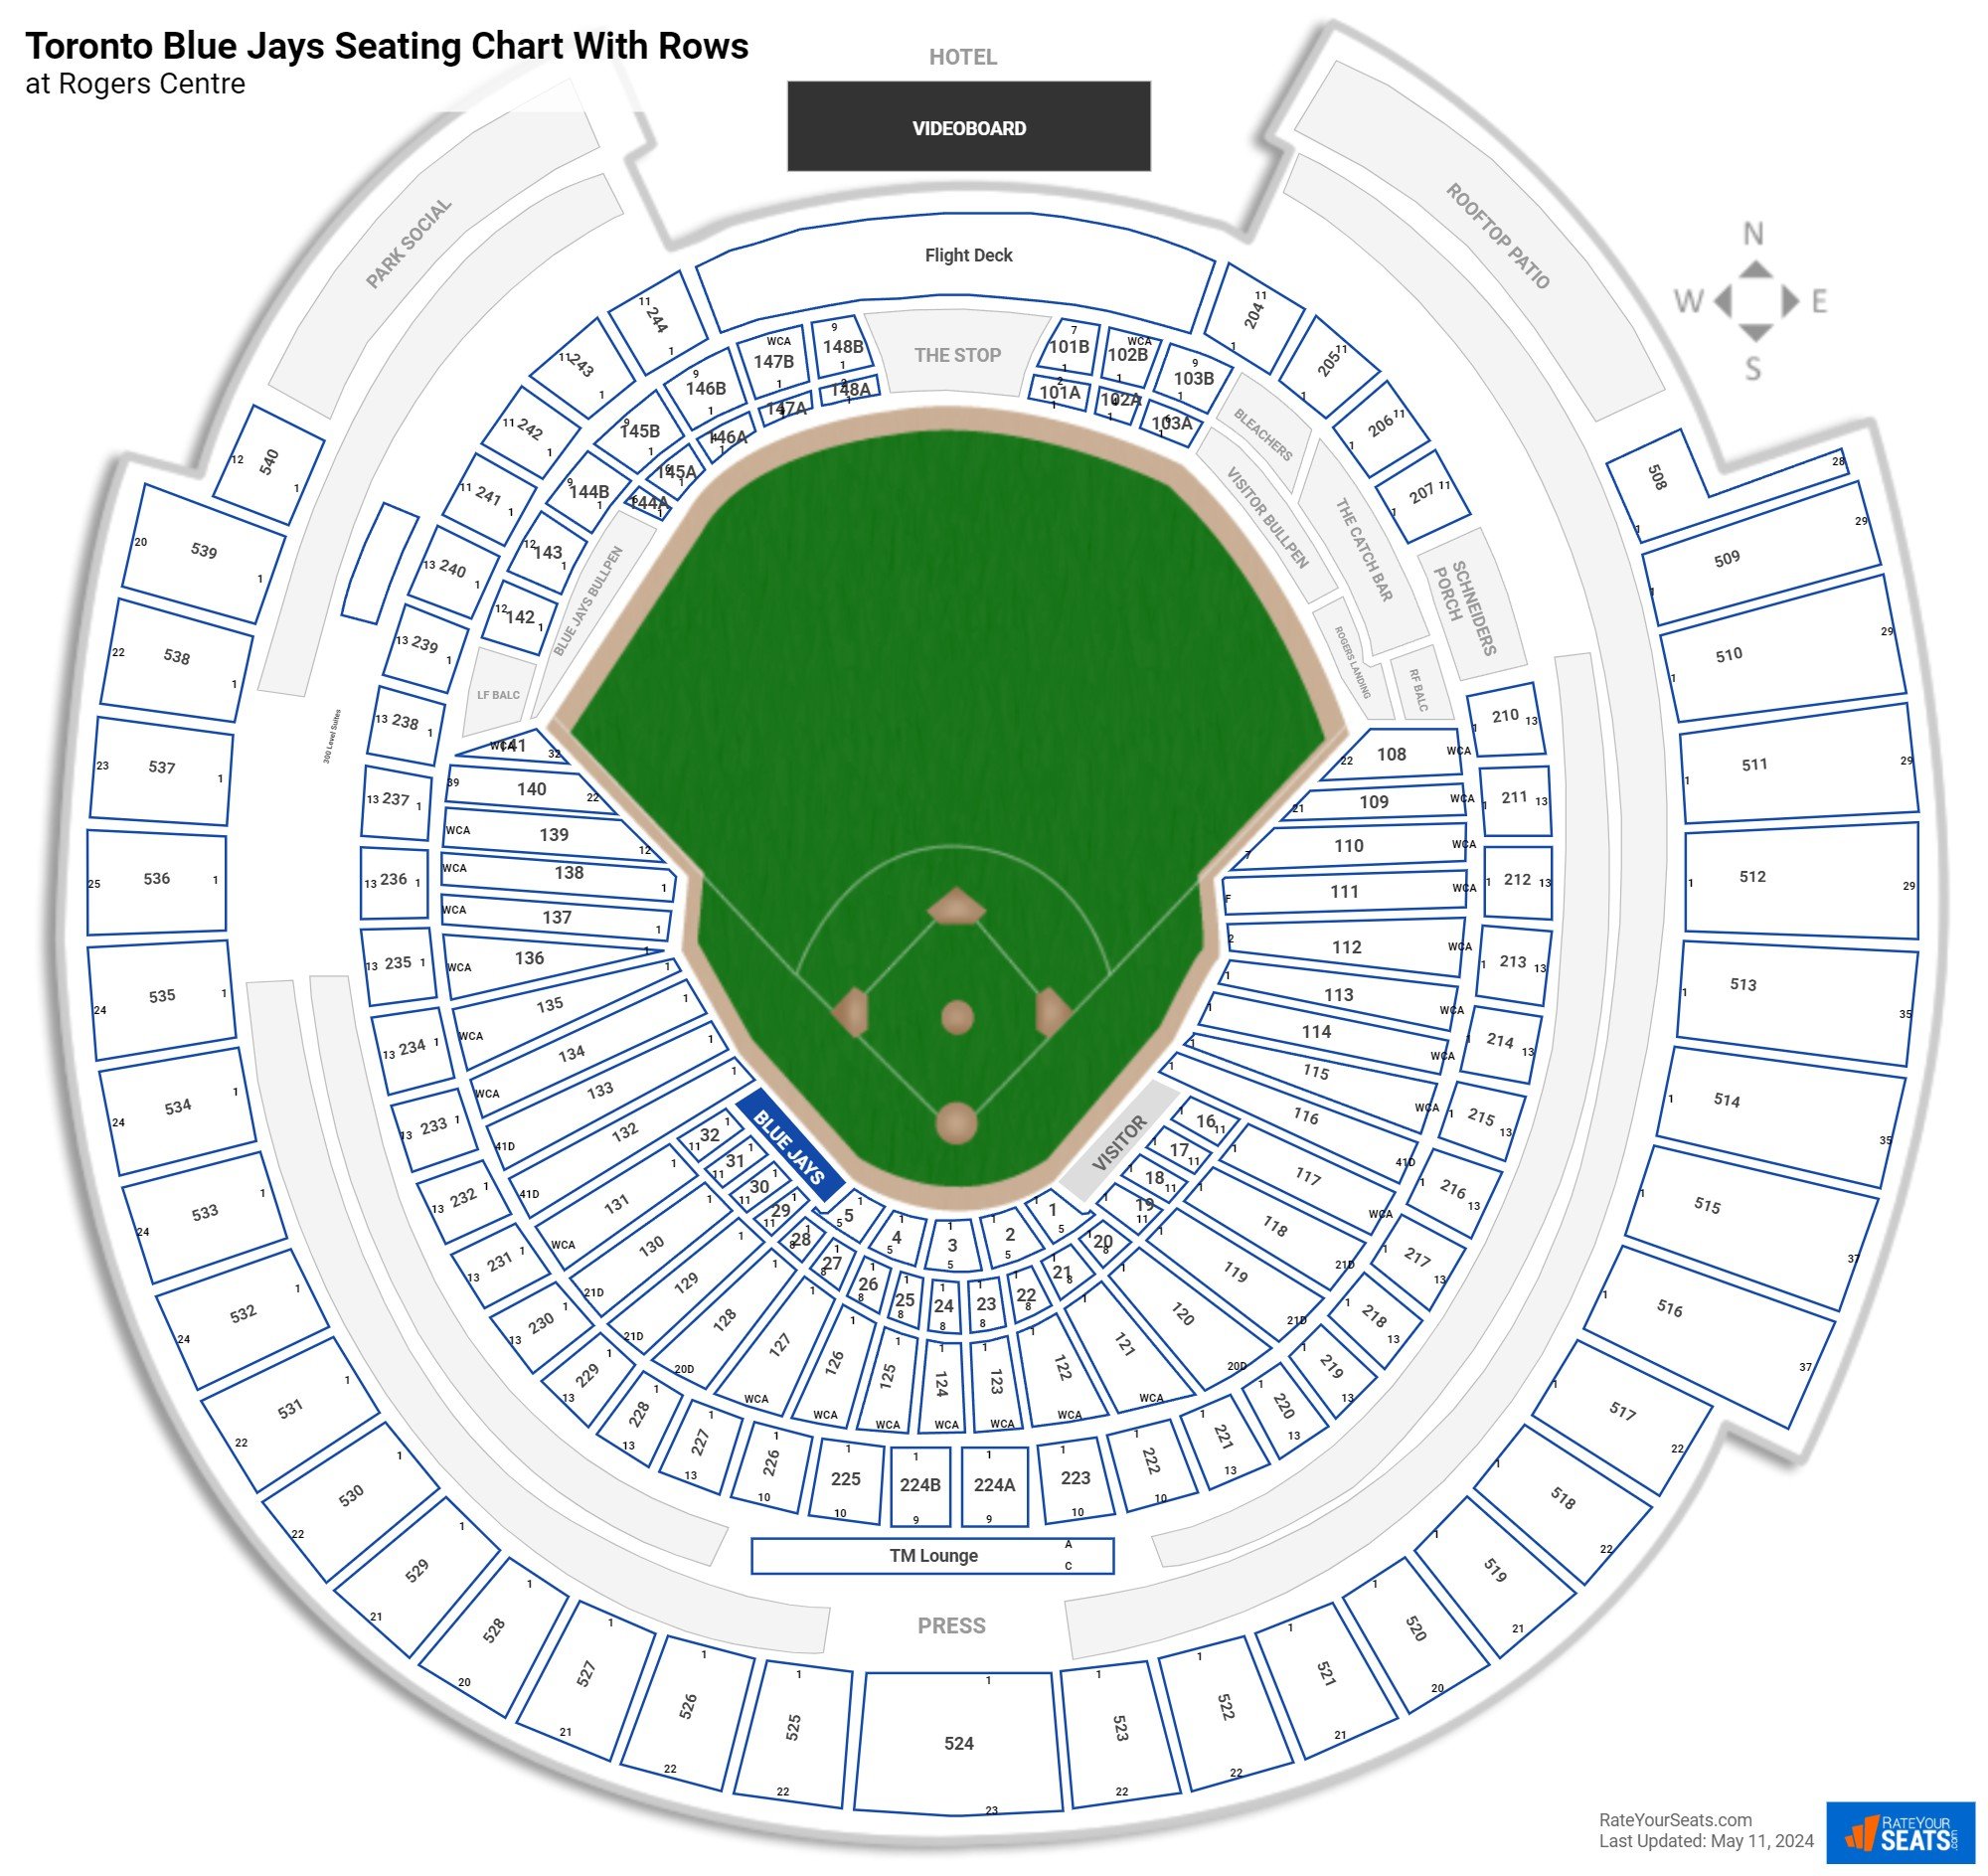 Toronto Blue Jays Seating Chart With Rows At Rogers Centre 